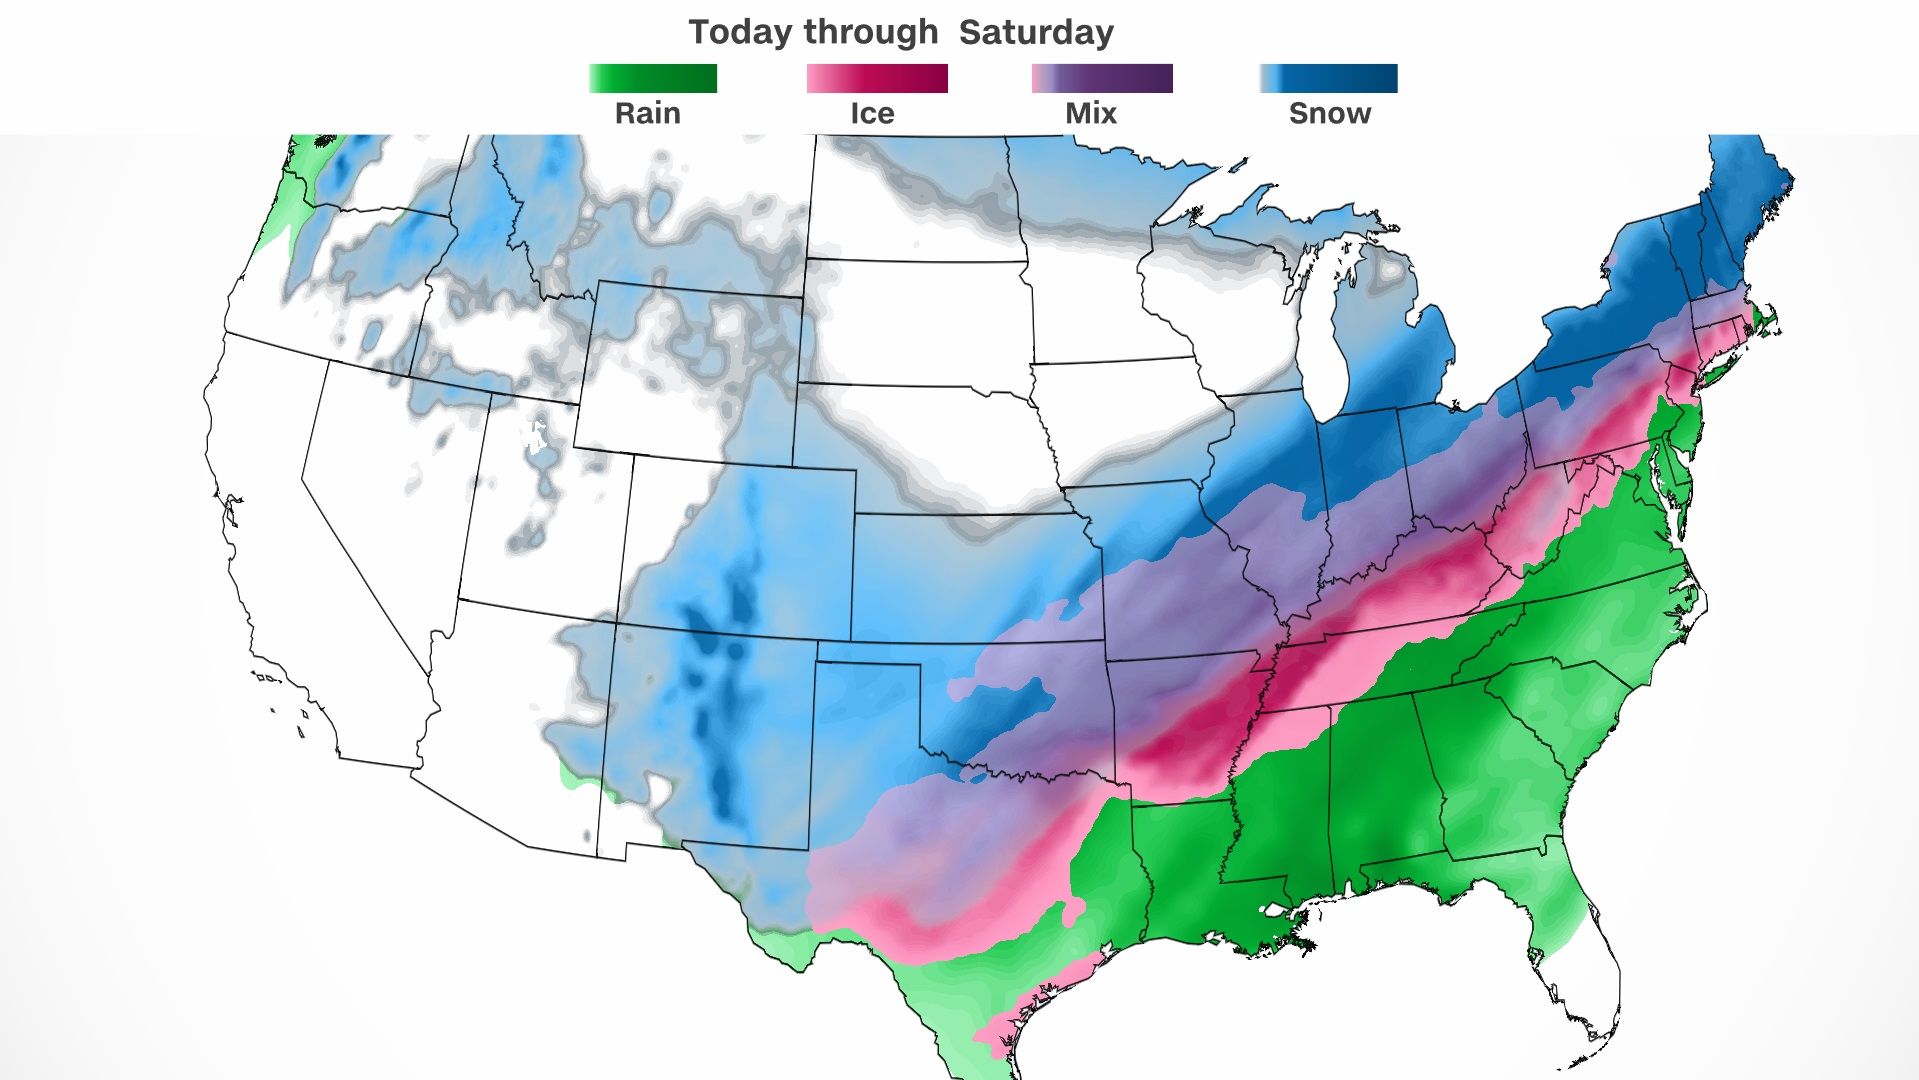 A powerful storm is bringing heavy rain, snow and ice to the eastern US.